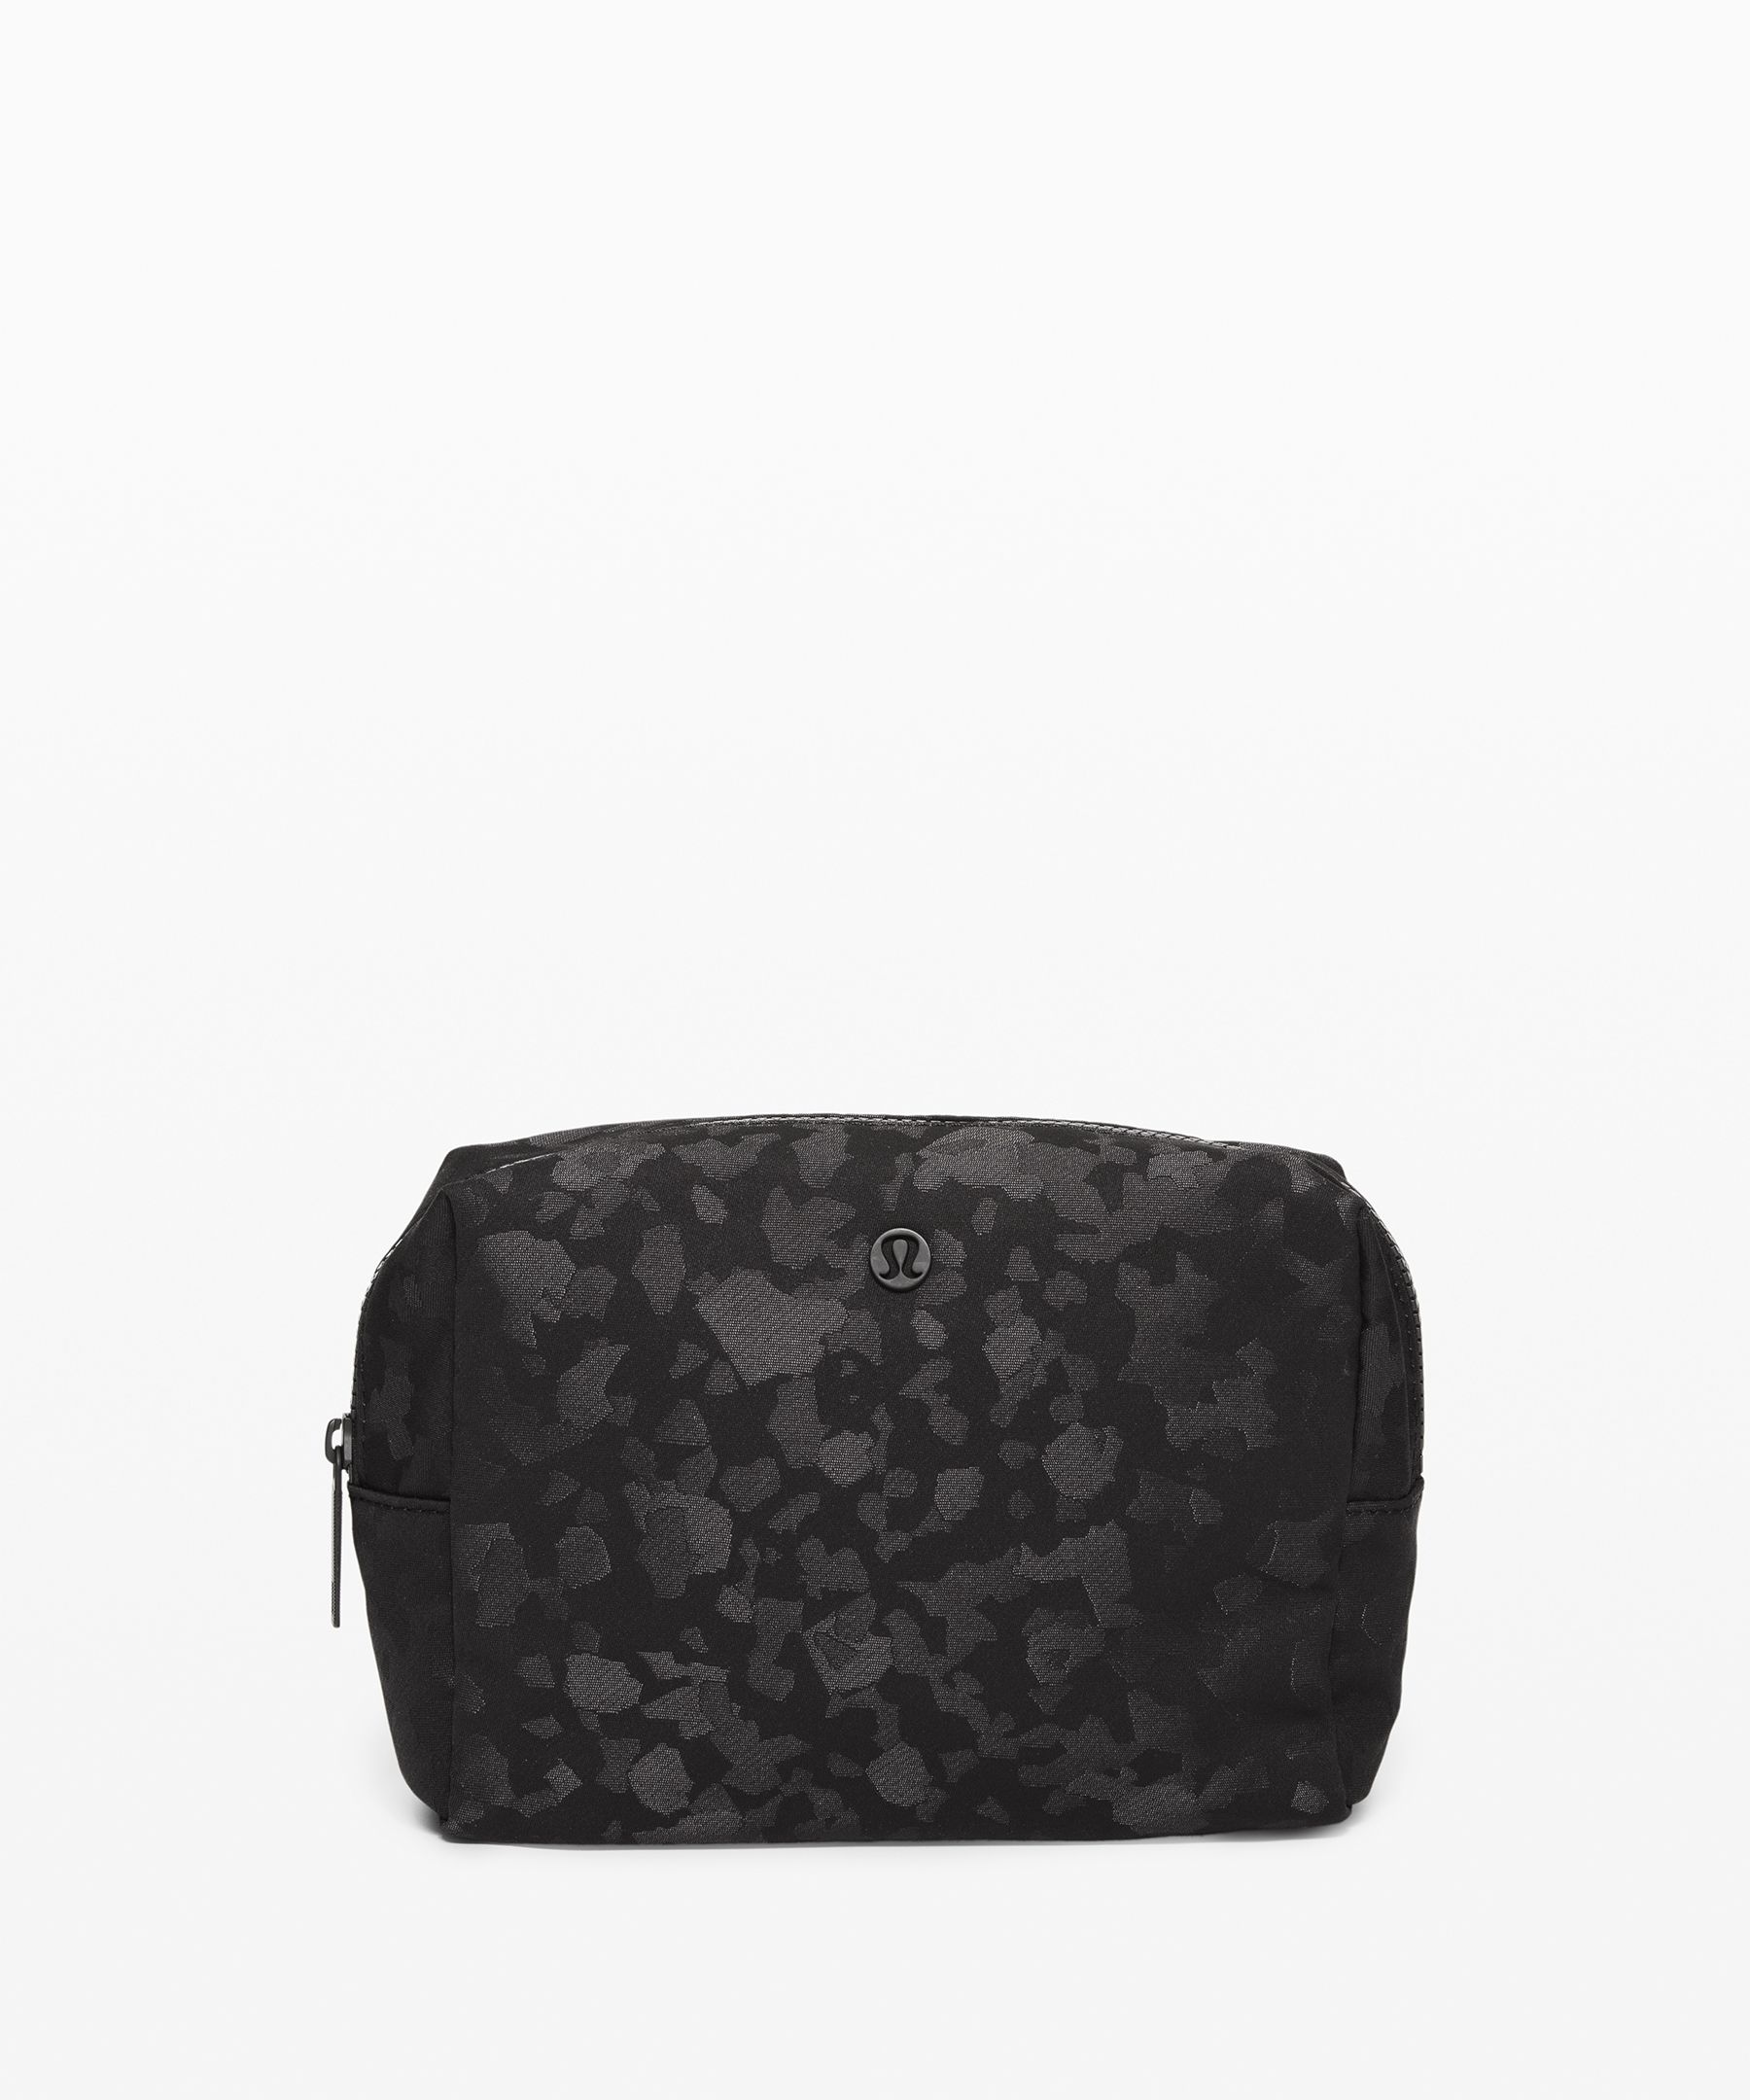 Lululemon All Your Small Things Pouch *mini 2l In Fragment Camo Jacquard Black Deep Coal